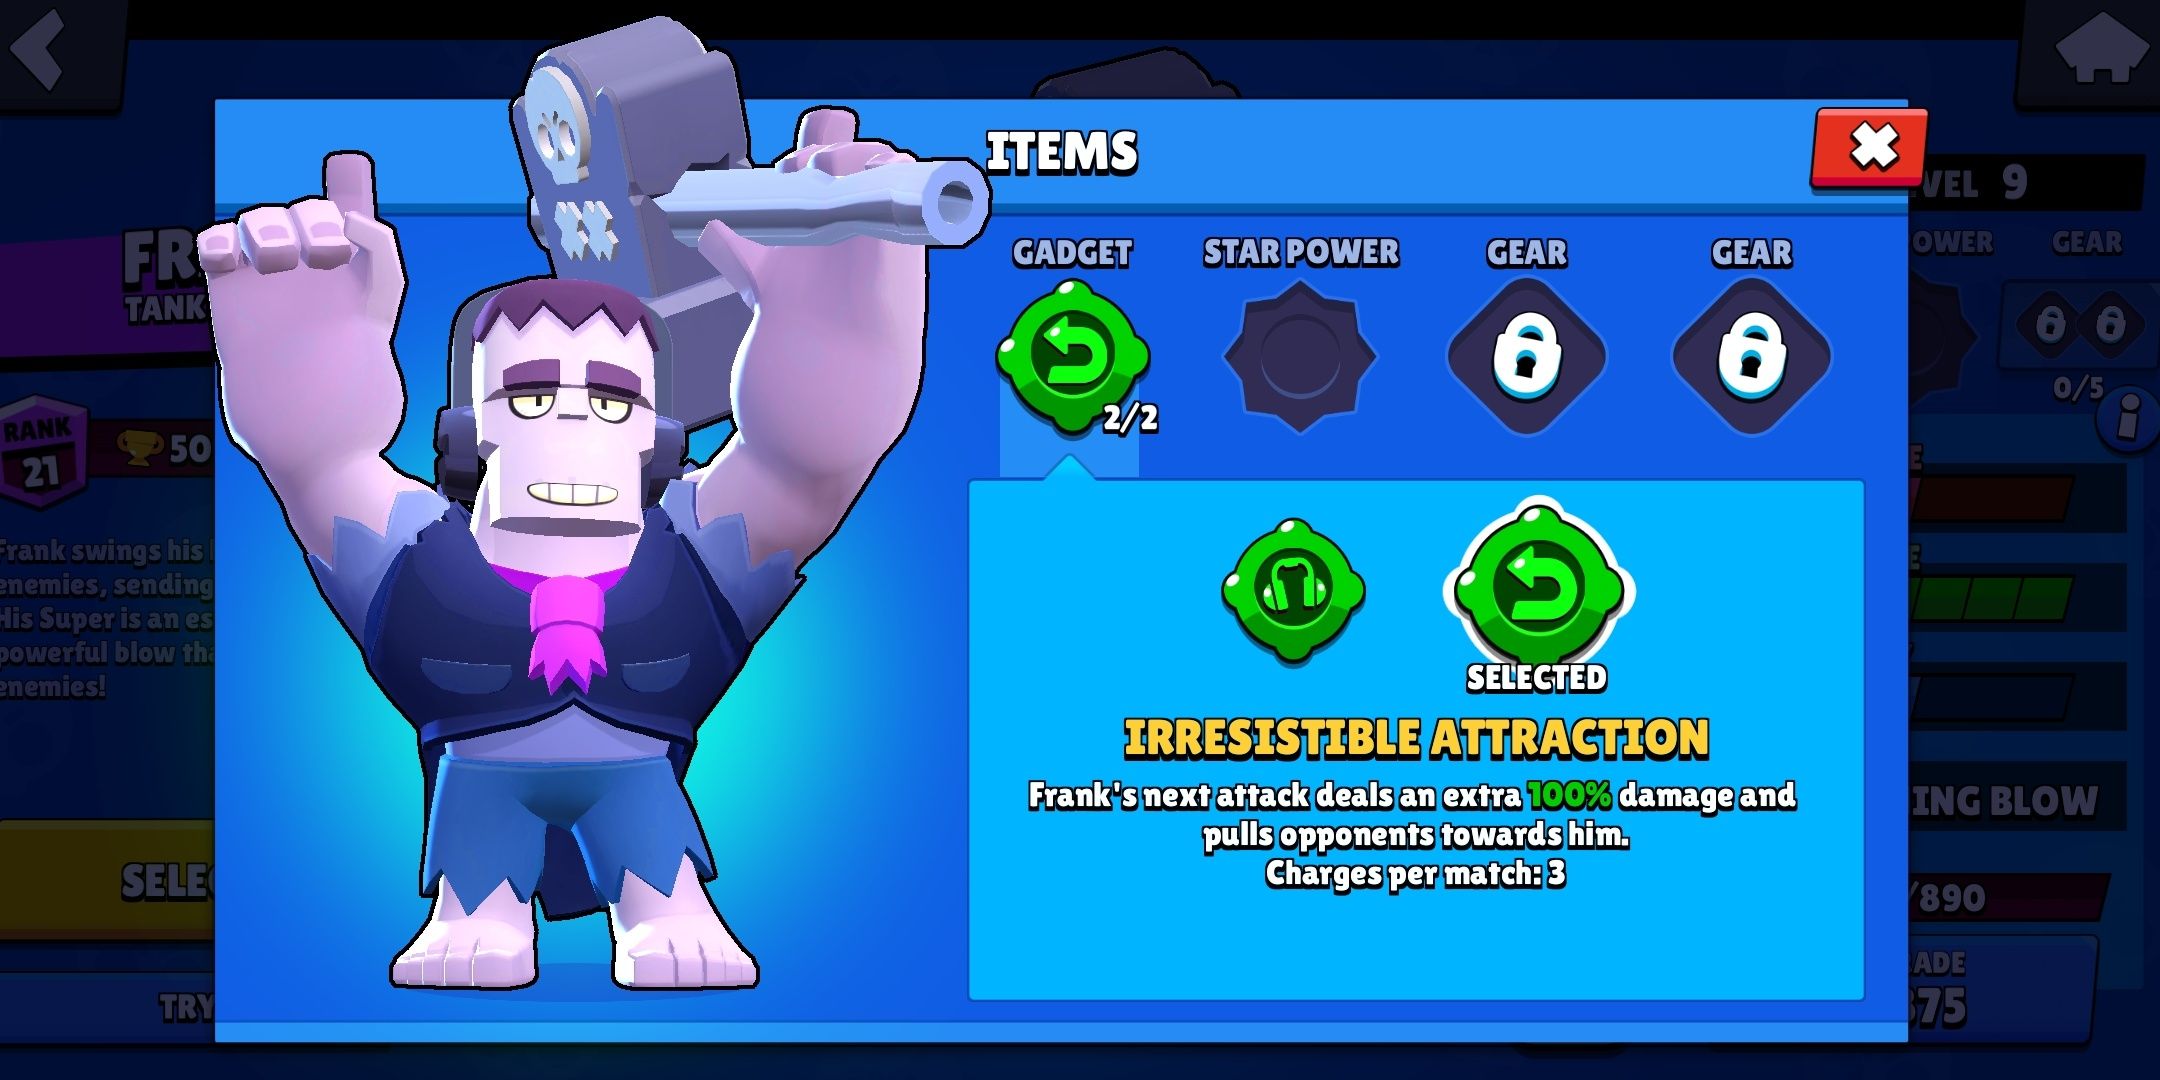 Supercell reveals new upcoming changes in Brawl Stars: Brawl Pass, season  length, and more